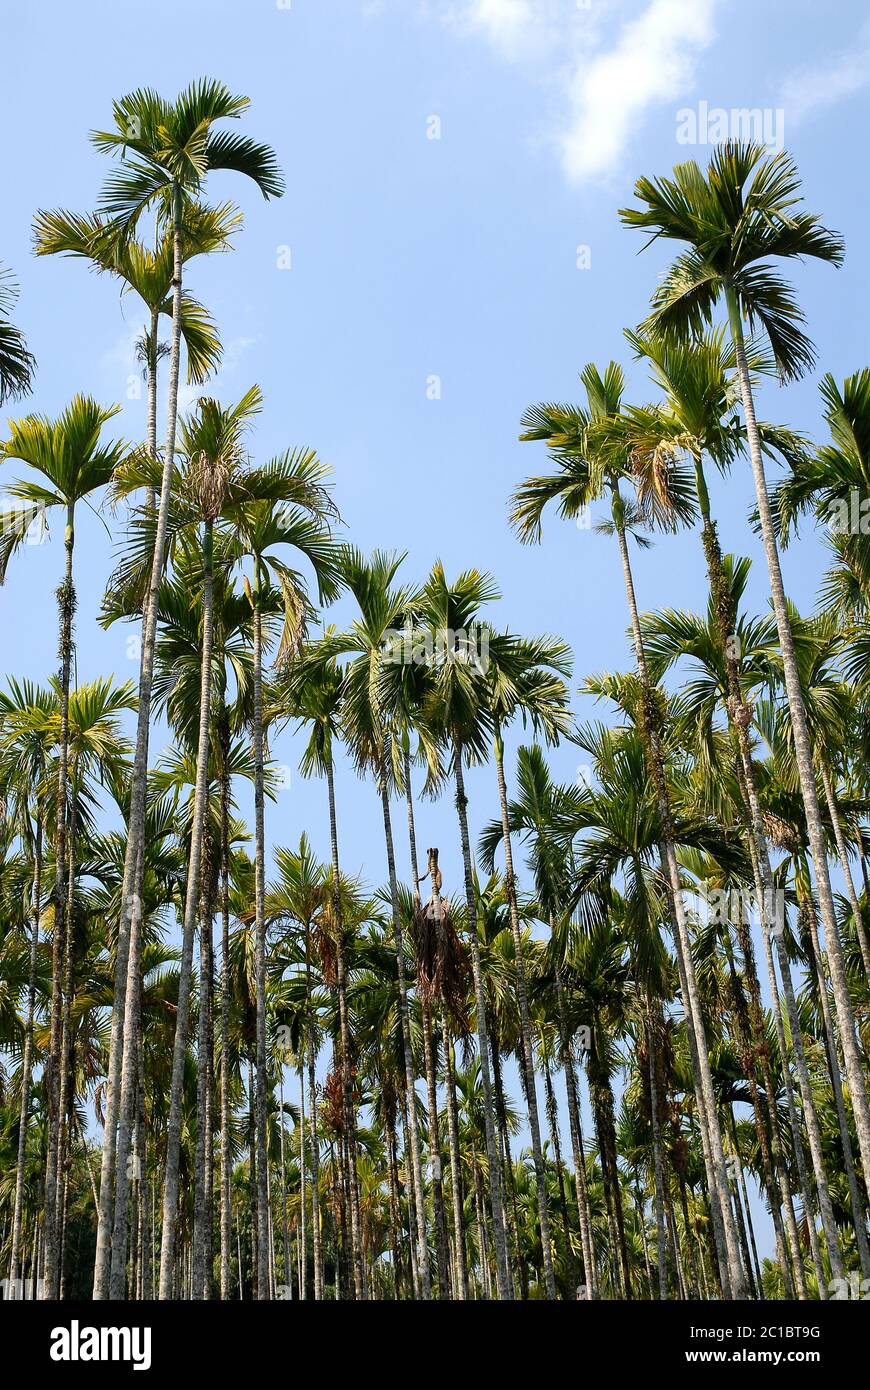 Palm trees on a plantation in Srimangal (Sreemangal) in Bangladesh. Srimangal is one of the main areas for horticulture in Bangladesh Stock Photo